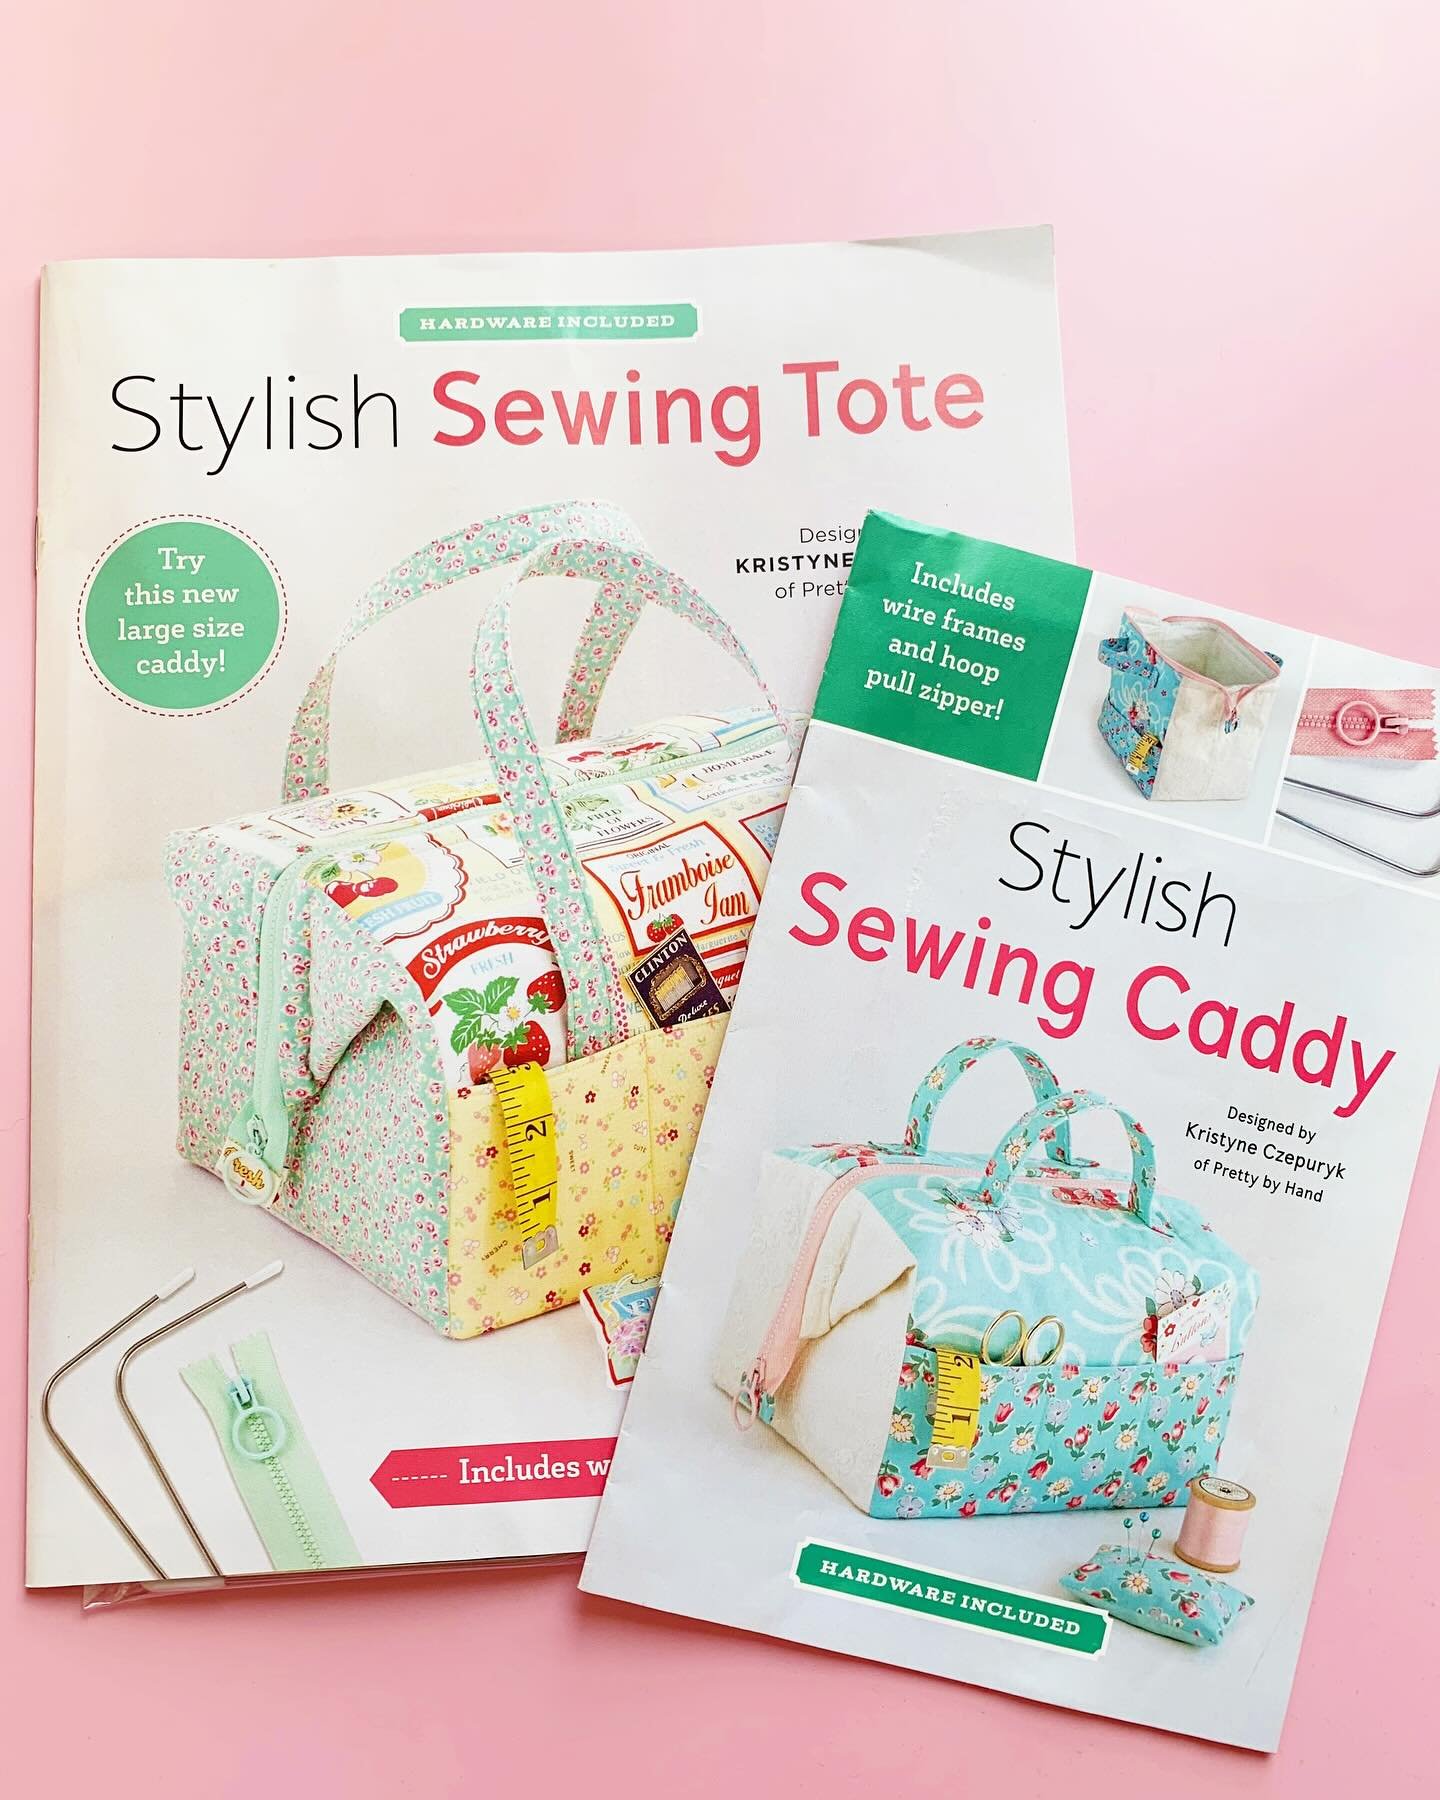 If you loved our #stylishsewingcaddy we know you&rsquo;ll love our #stylishsewingtote 
Both bags are great for sewing and knitting bags but they can also be used for travel as a cosmetic bag or to keep your books and journals in!
How do you use yours